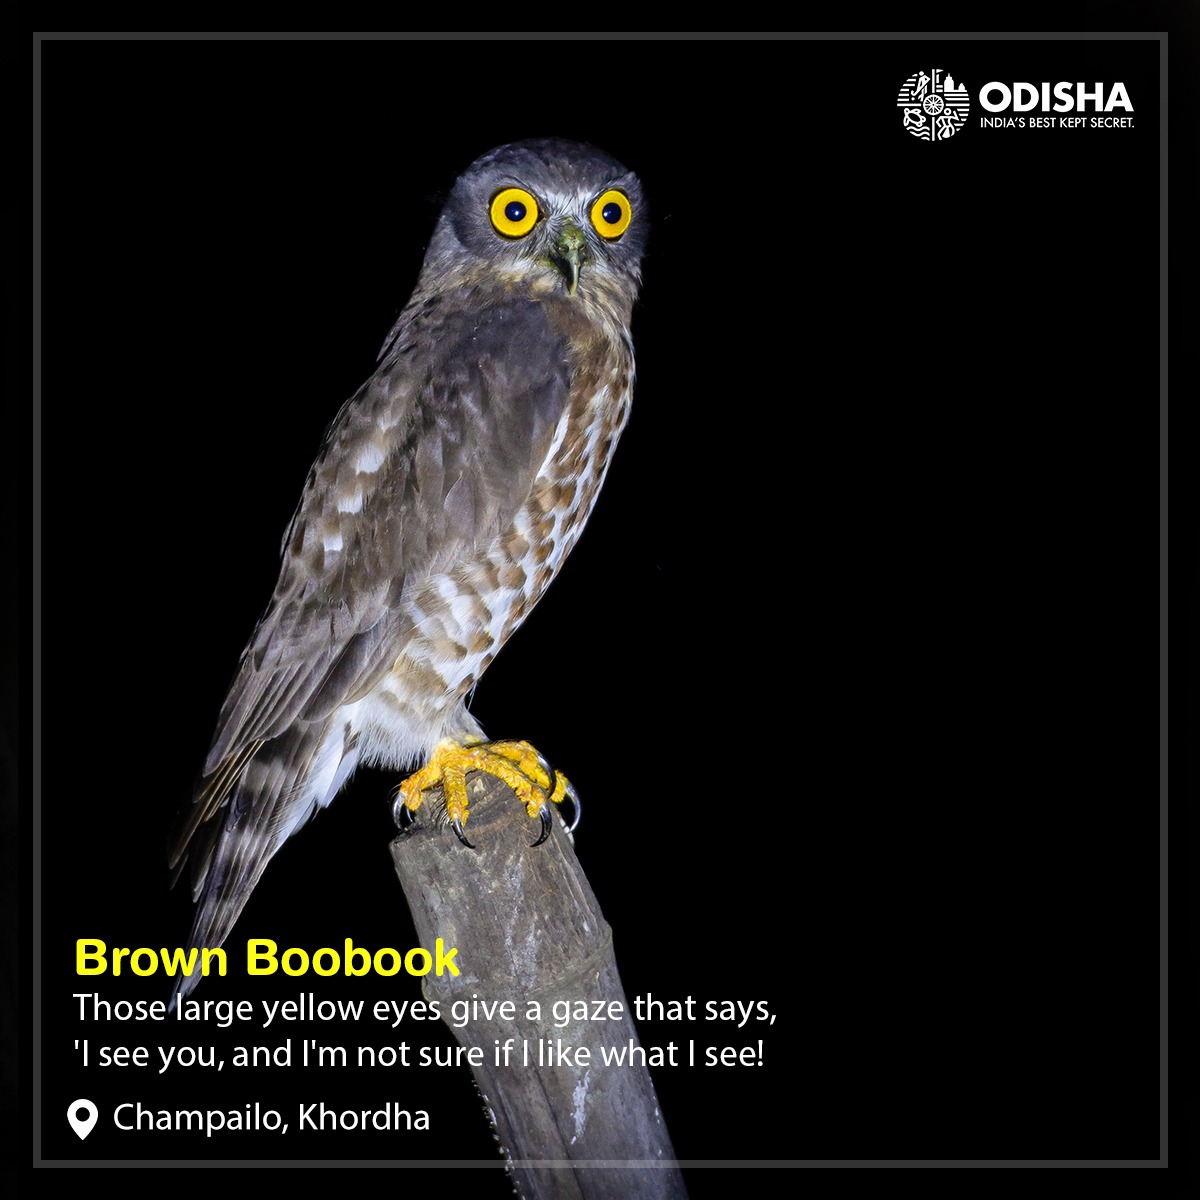 Brown Boobook also known as Brown Hawk Owl because of their longish tail and inconspicuous facial disk, which  lends them a hawk-like appearance. They roost during the day and forage at dusk and at night.

📸 Bibek Bibhupada at Champailo

#BirdsOfChilika #OdishaTourism